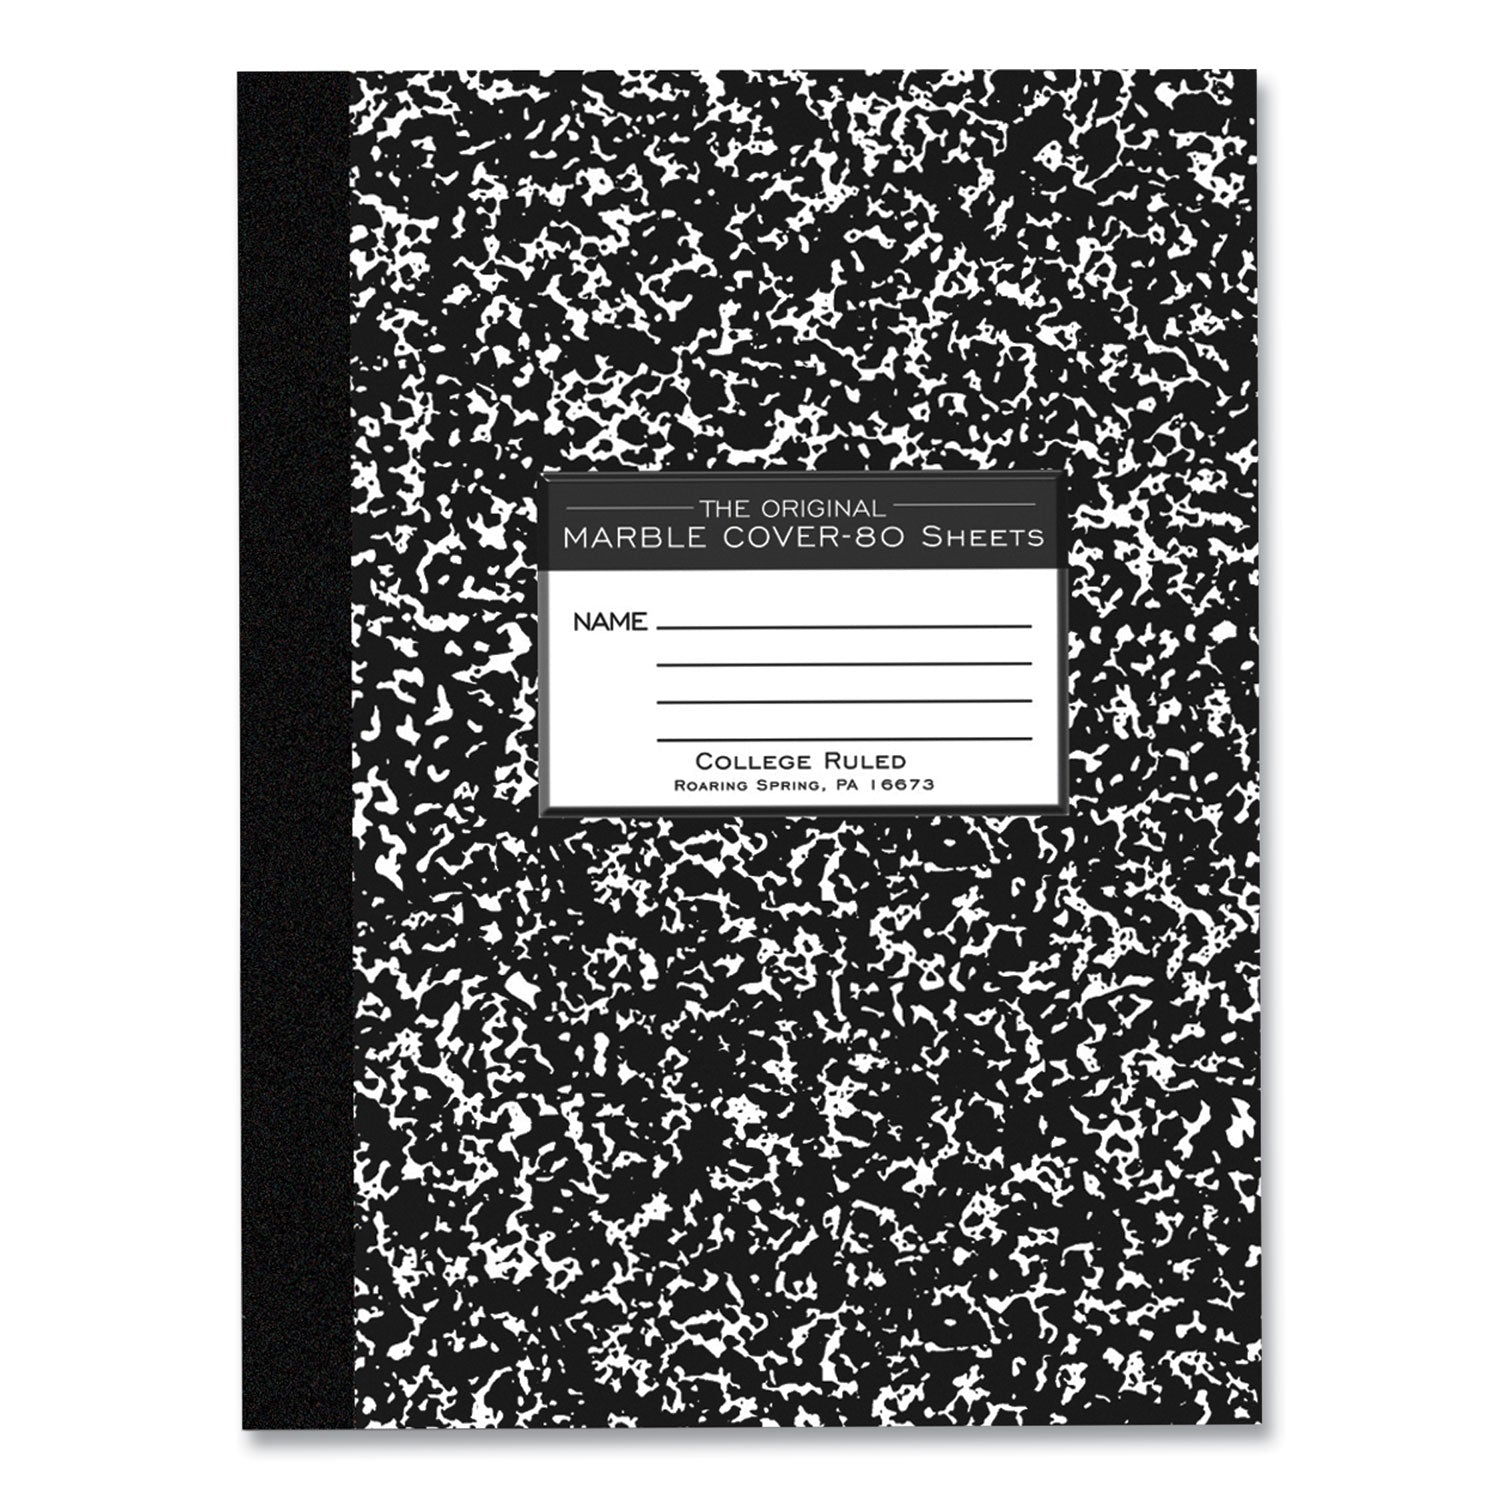 flexible-cover-composition-book-med-college-rule-black-marble-cover-80-1025-x-788-sheet-48-ct-ships-in-4-6-bus-days_roa77481cs - 2